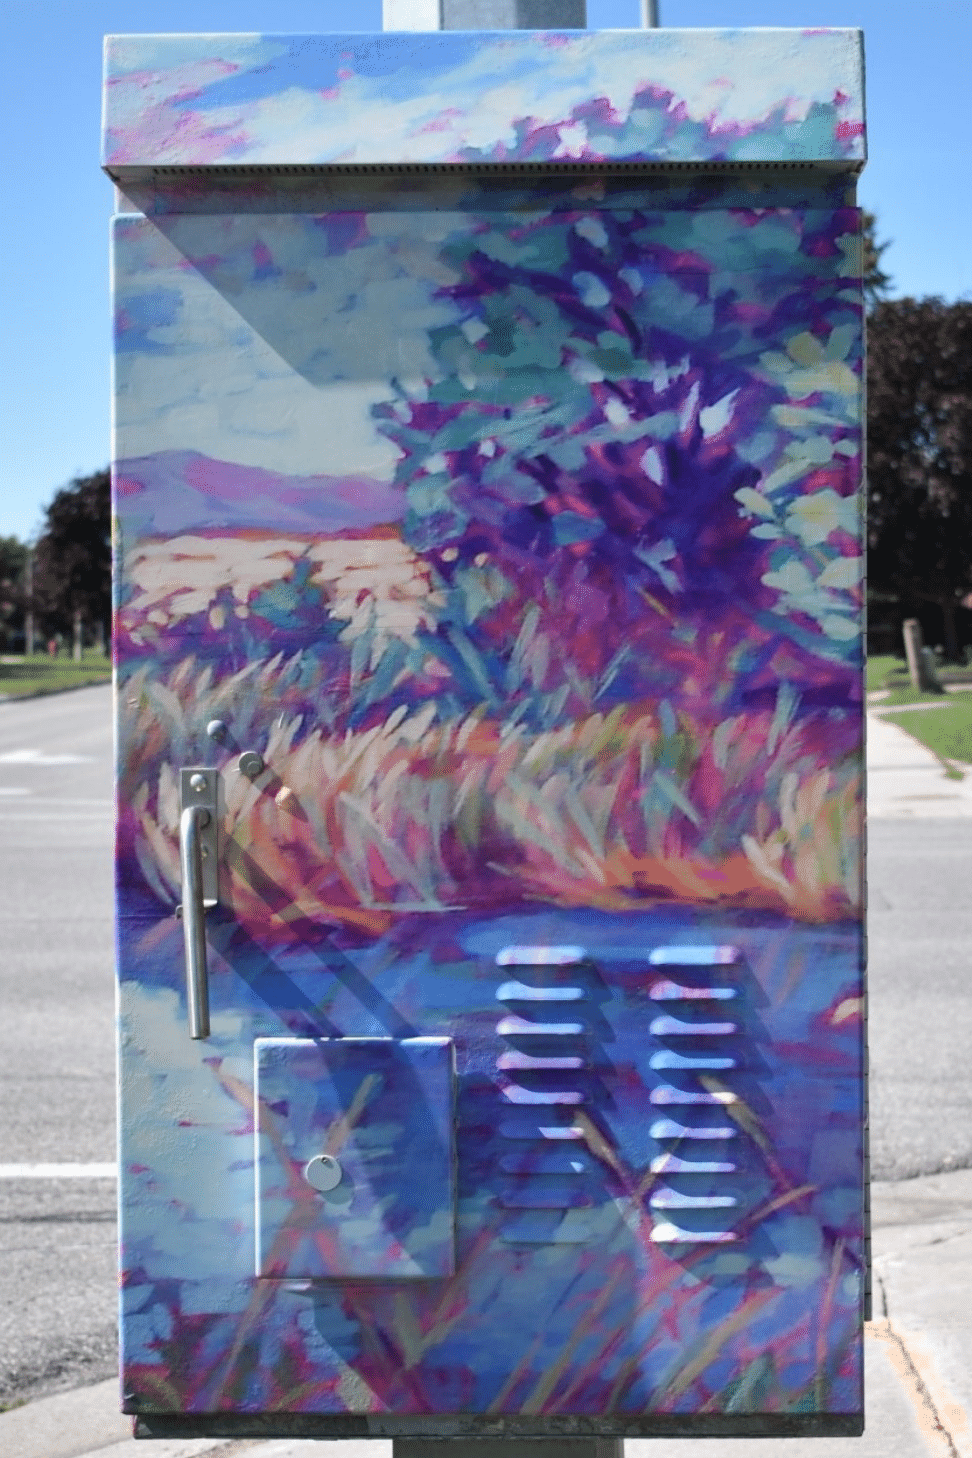 Utility box with artwork of watercolour tree and wild grasses